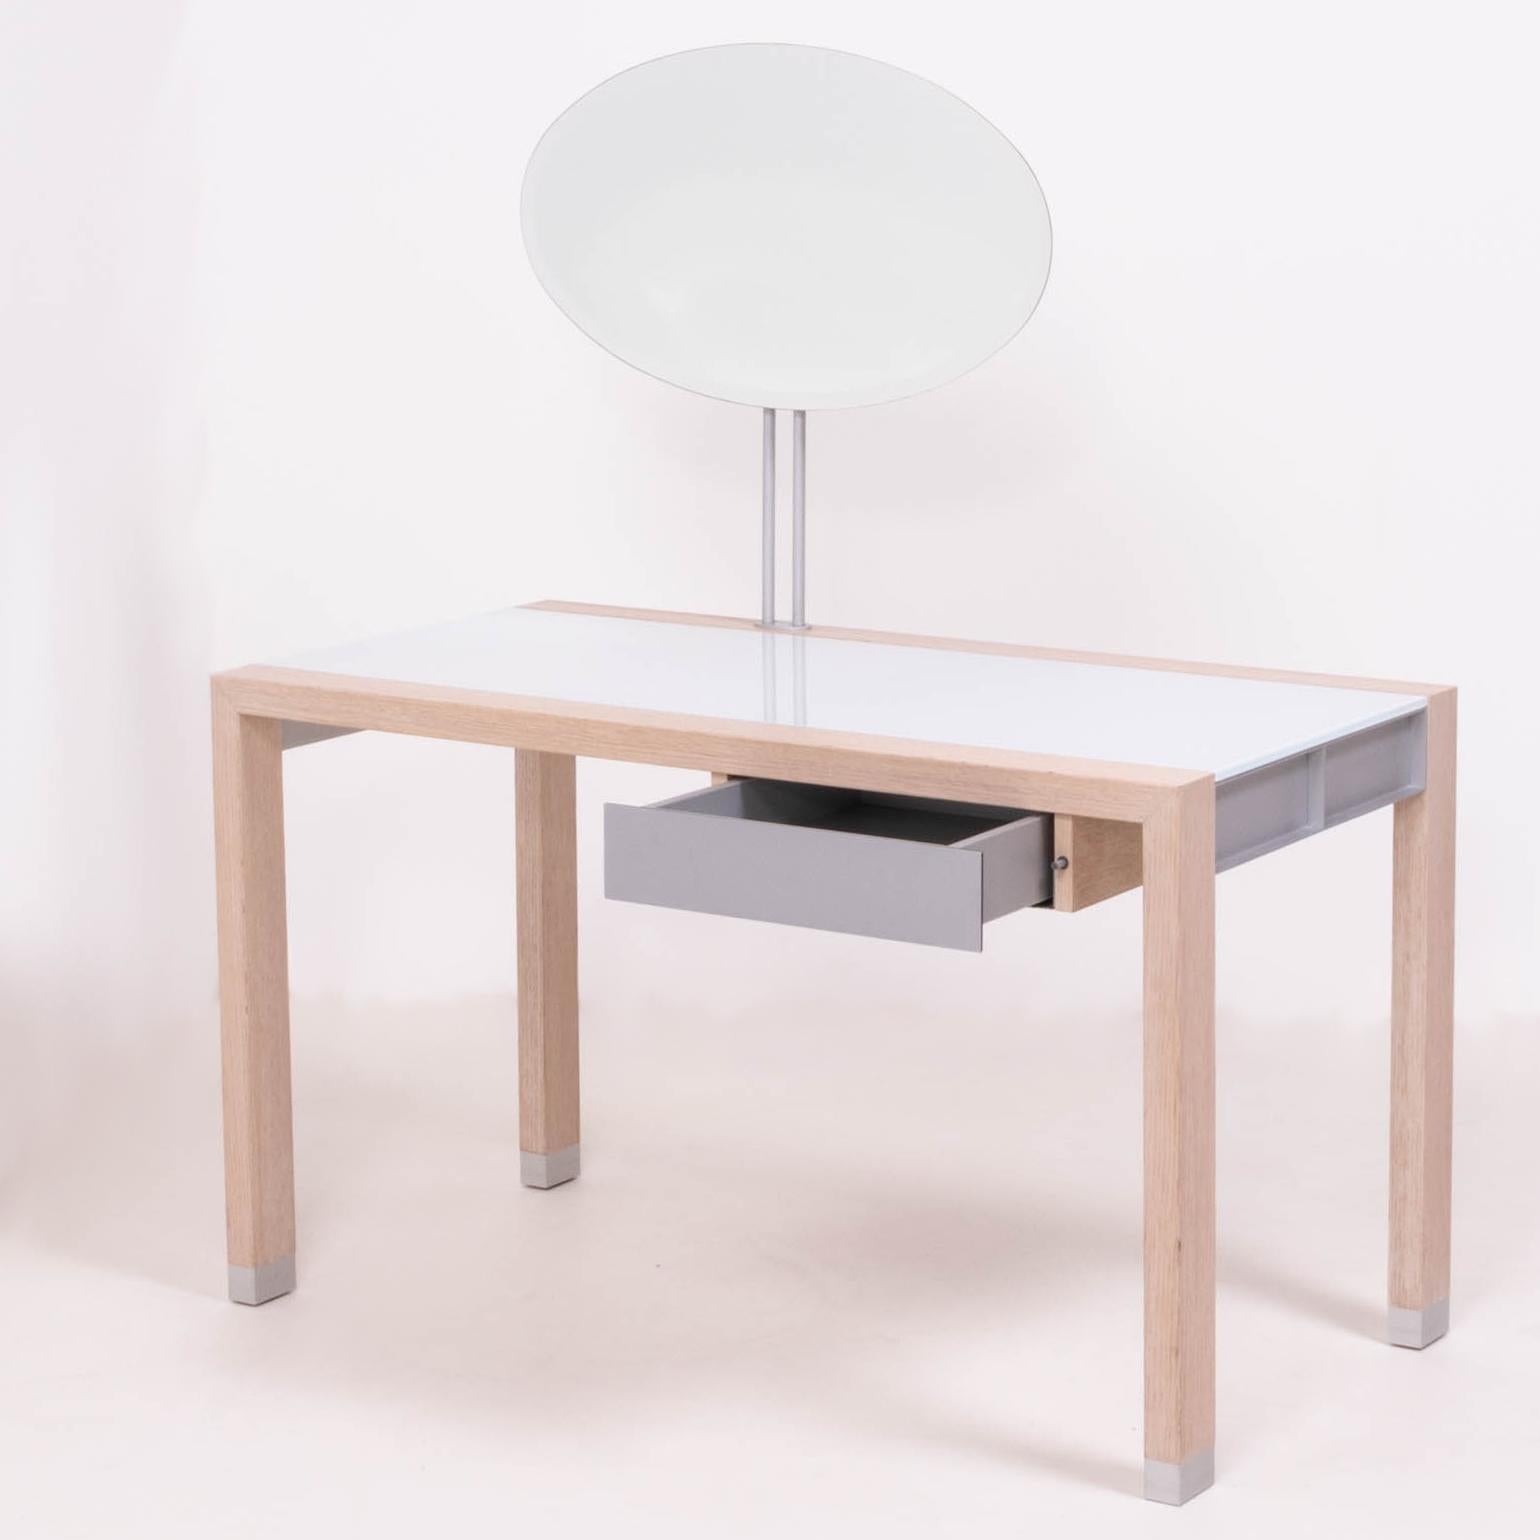 Beveled Lumeo Dressing Table by Peter Maly for Ligne Roset